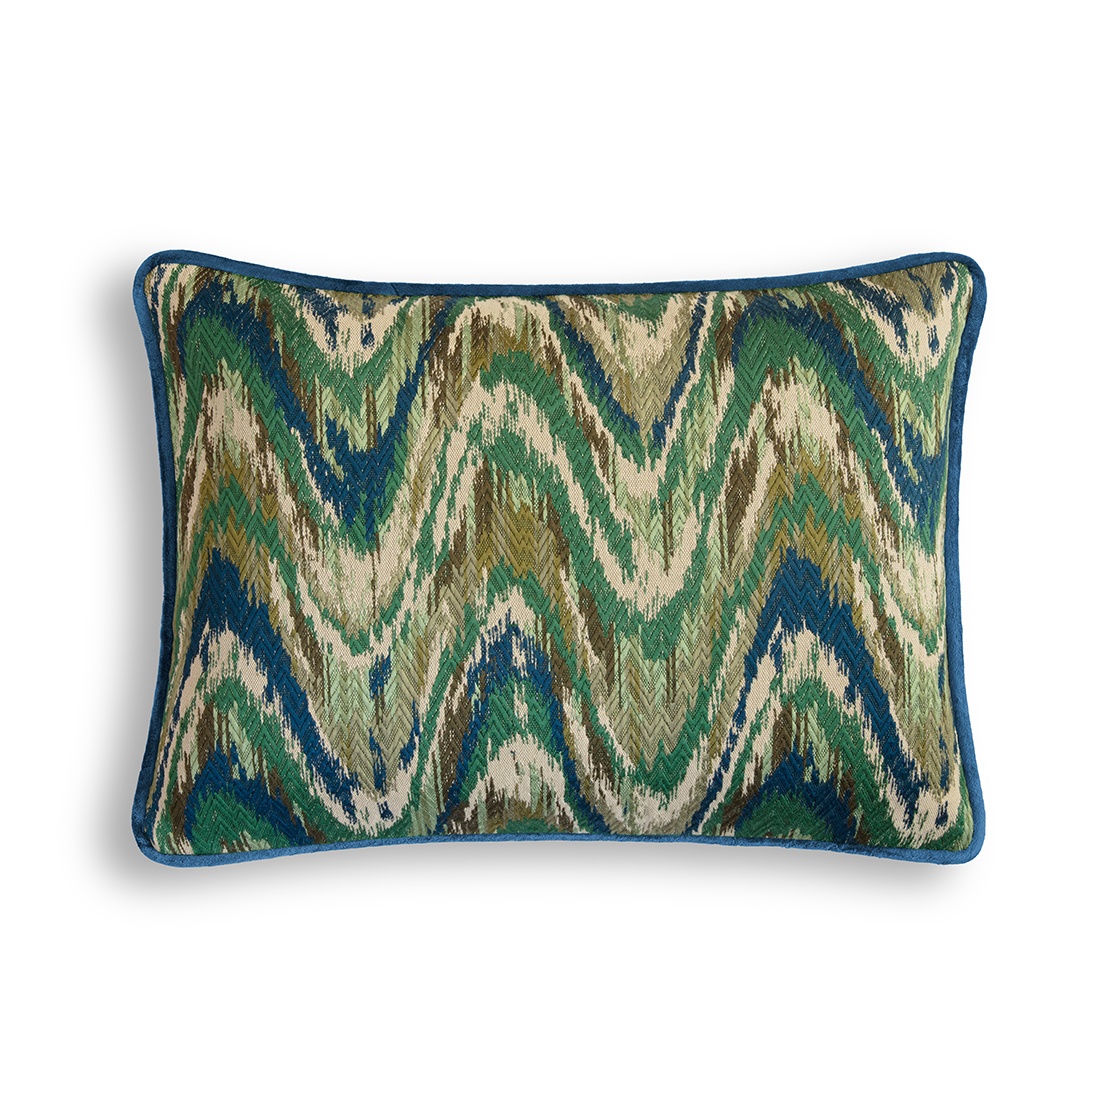 Kyma cushion - Sherwood backed and piped in Capri silk velvet - Prussian blue - Beaumont & Fletcher